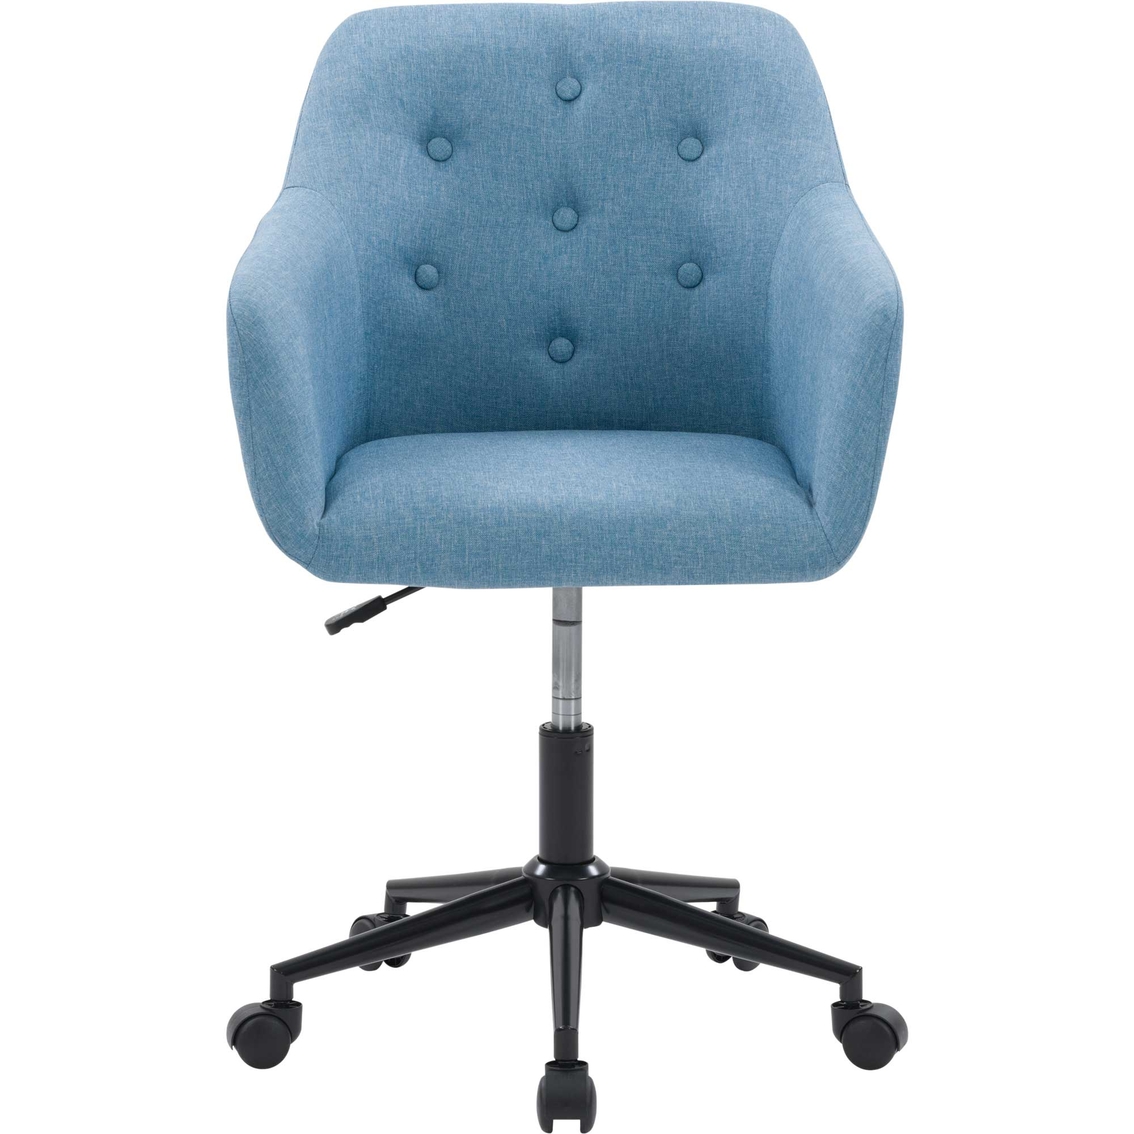 CorLiving Marlowe Upholstered Button Tufted Task Chair - Image 2 of 9